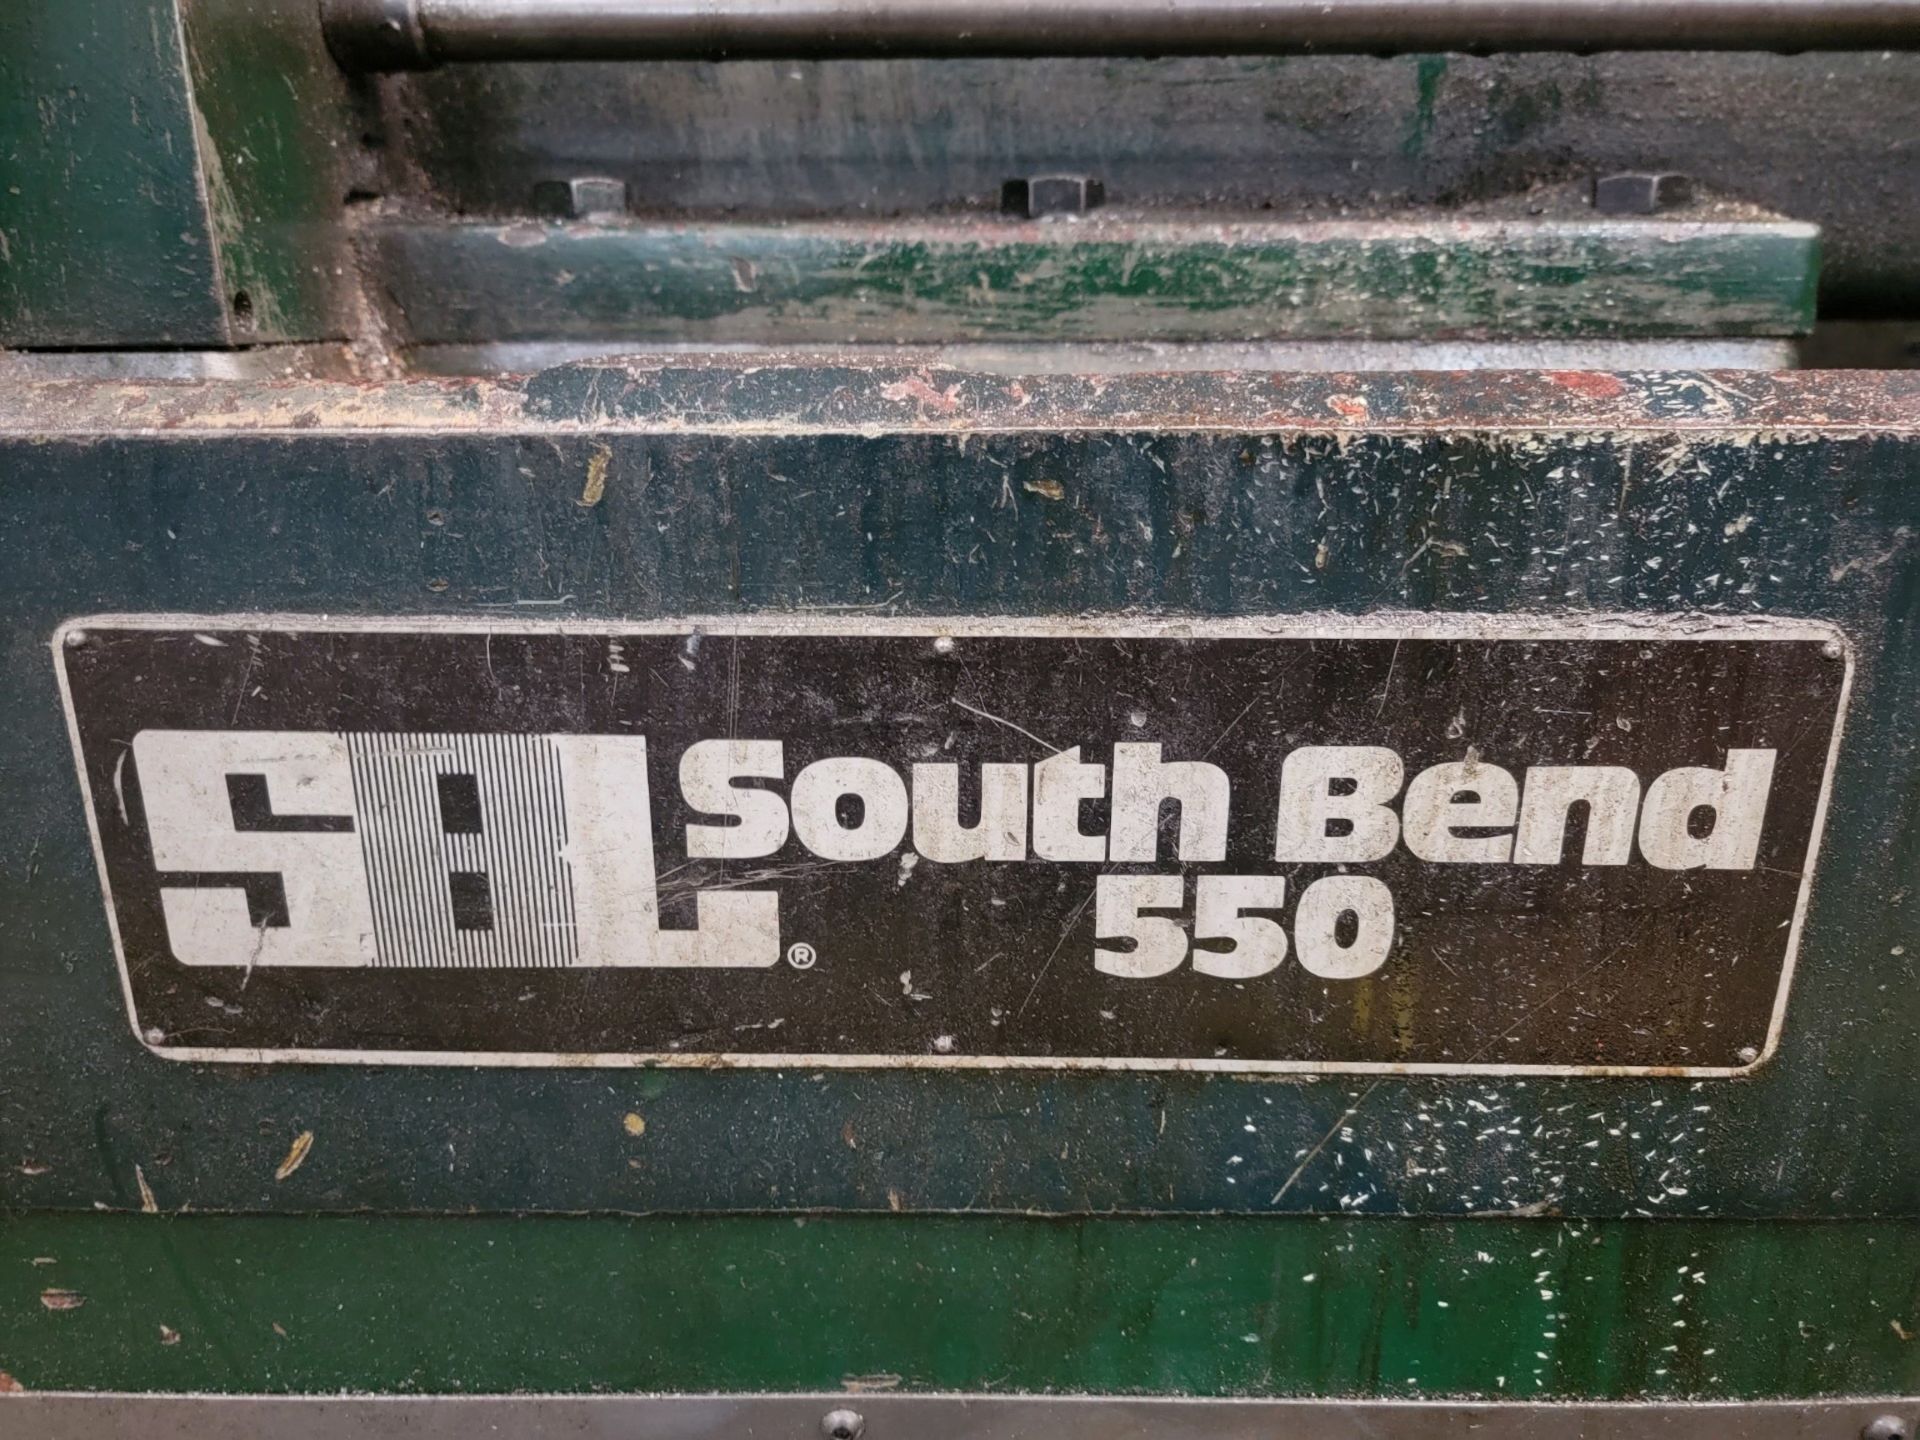 South Bend 550 Lathe (EH156) - Lester PA - Image 4 of 4